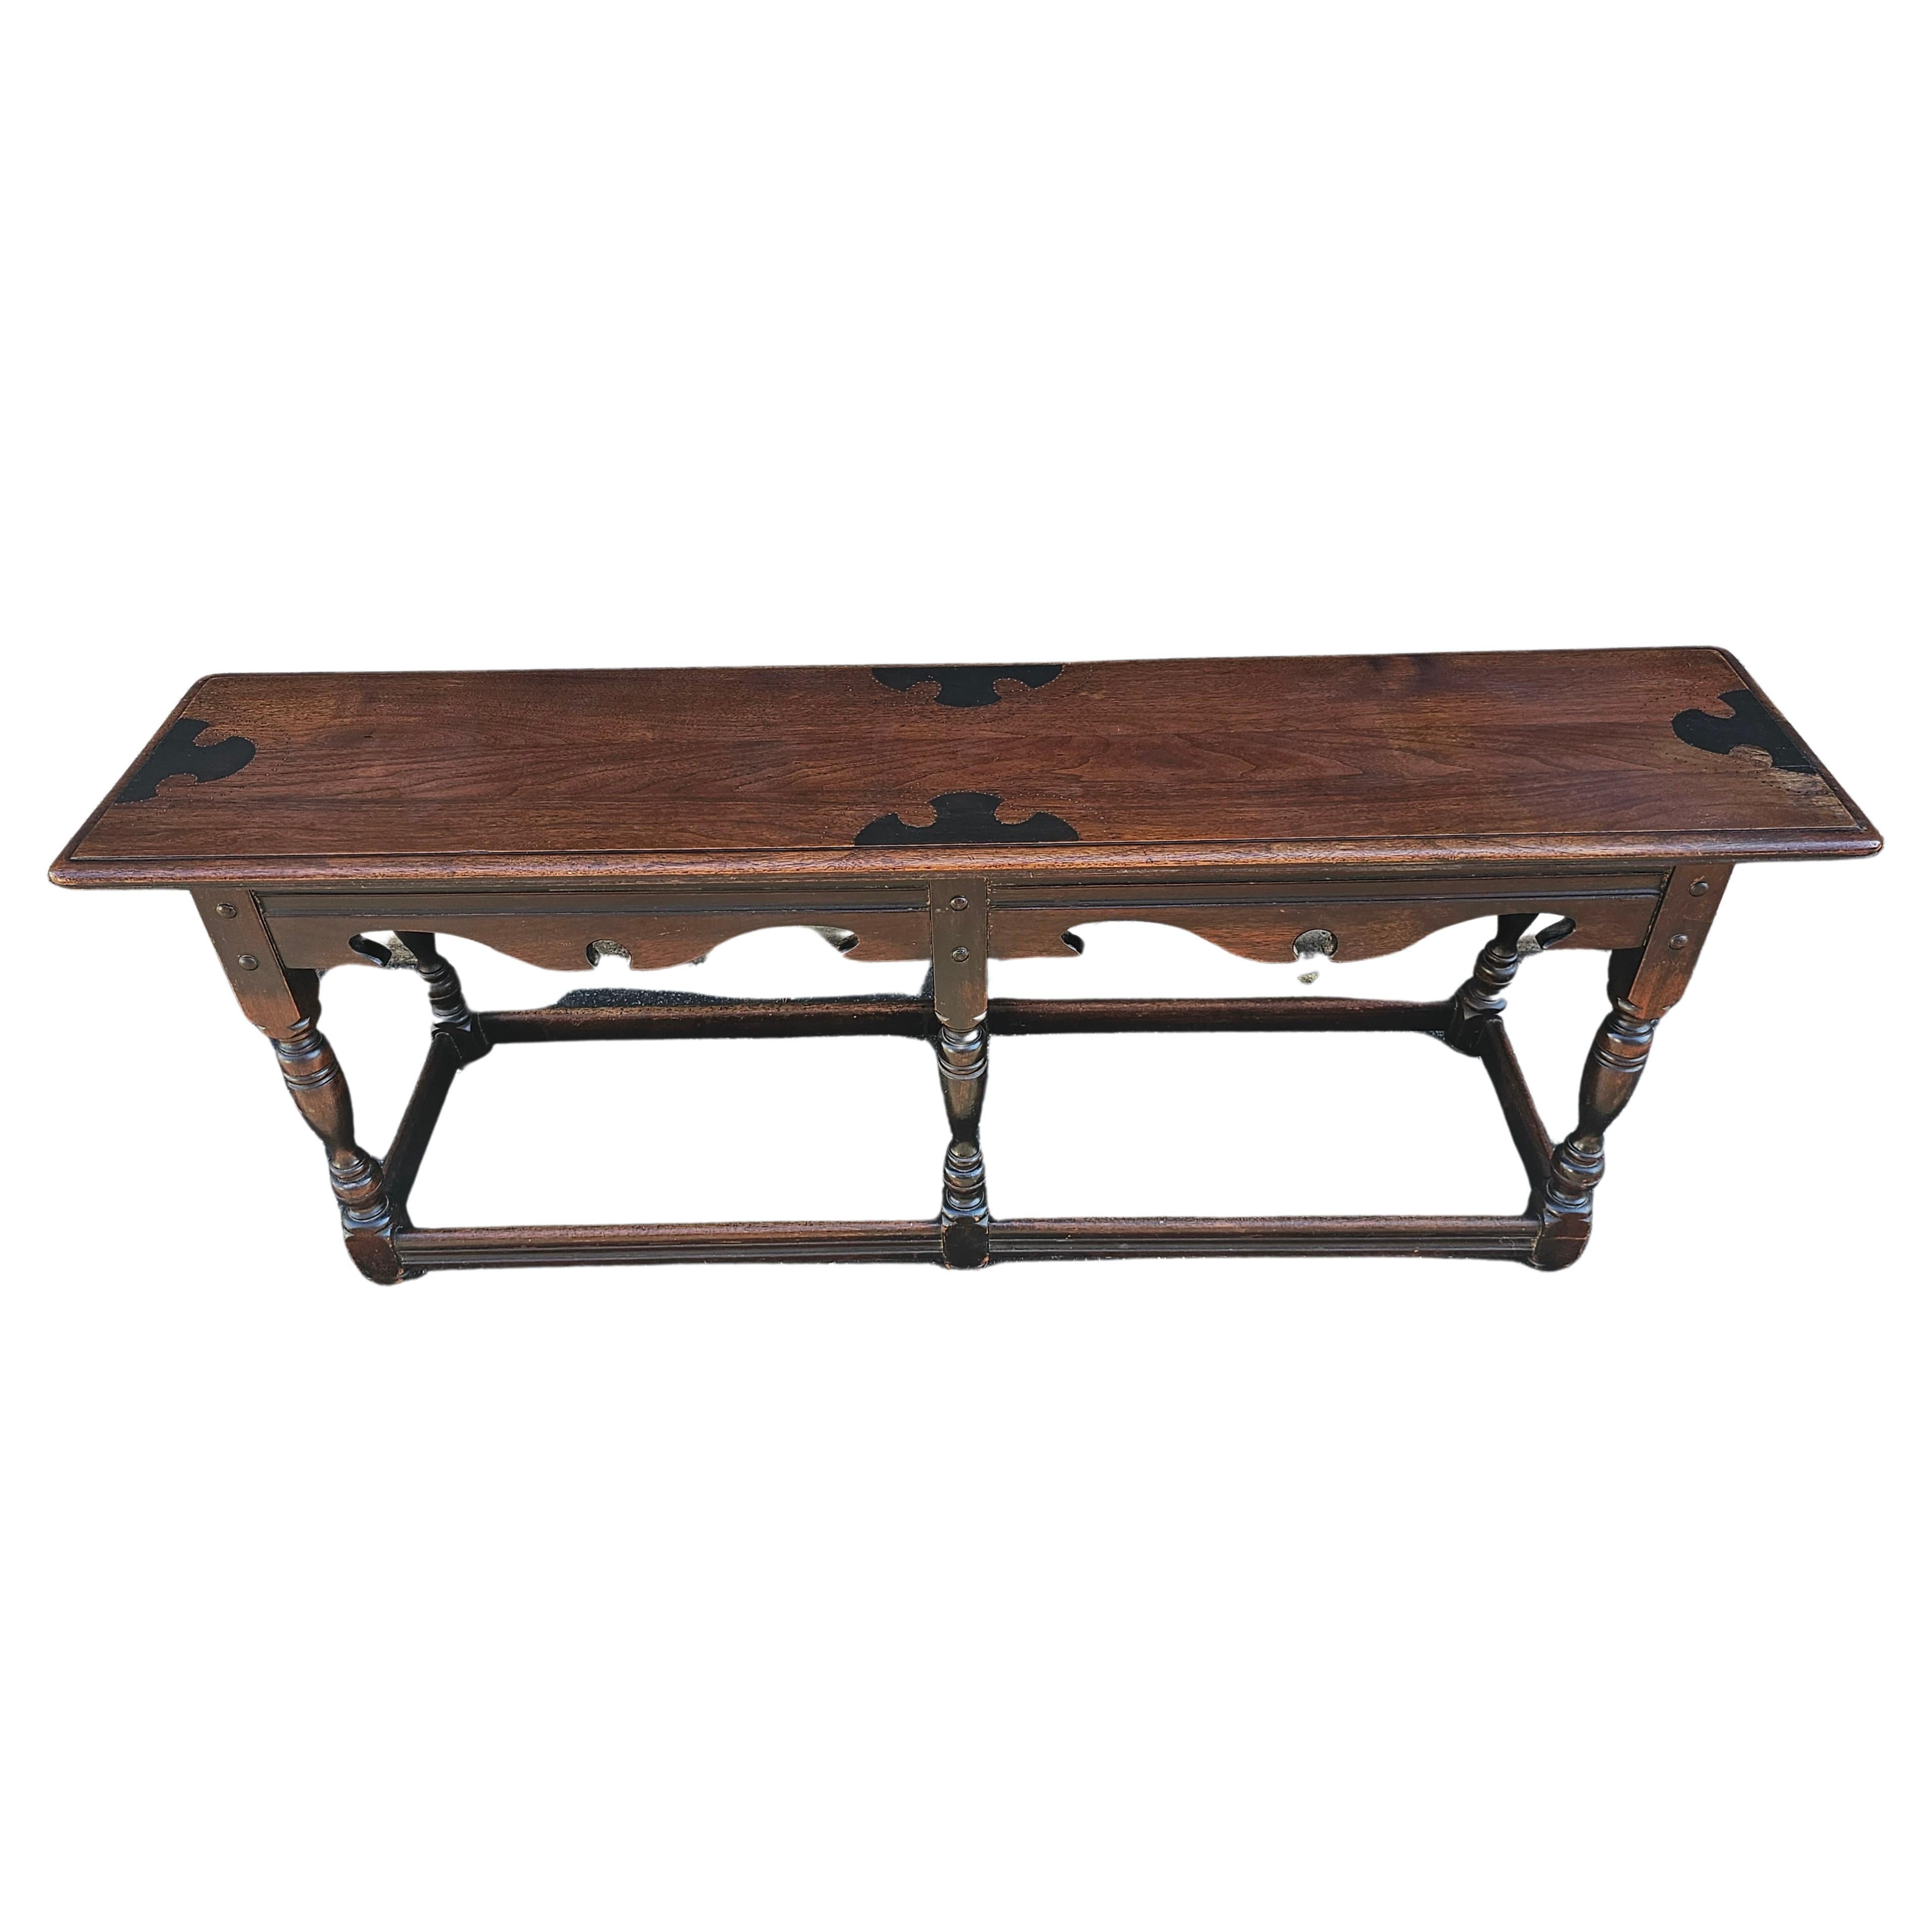 A late 19th Century Flint's Fine Furniture Edwardian Walnut Bench in great antique condition. Measures 52